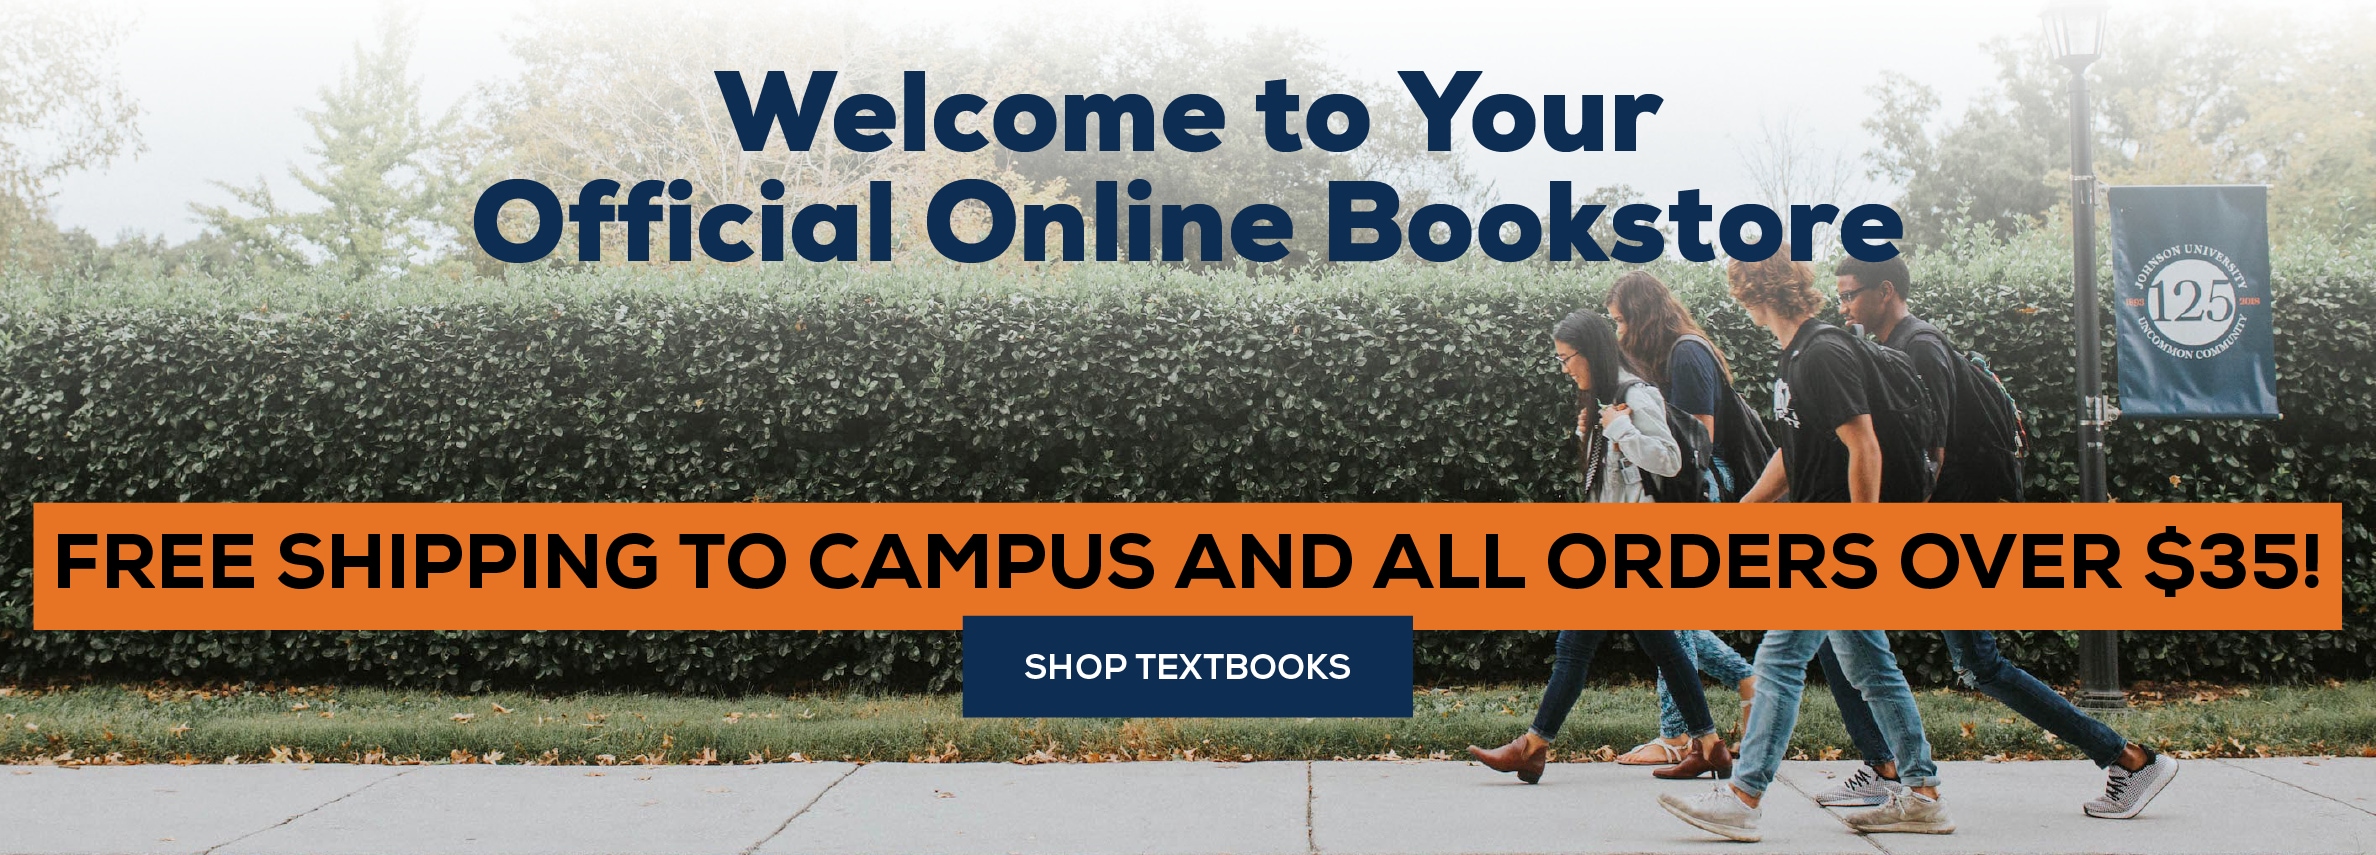 Welcome to your official online bookstore. Free shipping to campus and all orders over $35. Click to shop textbooks.